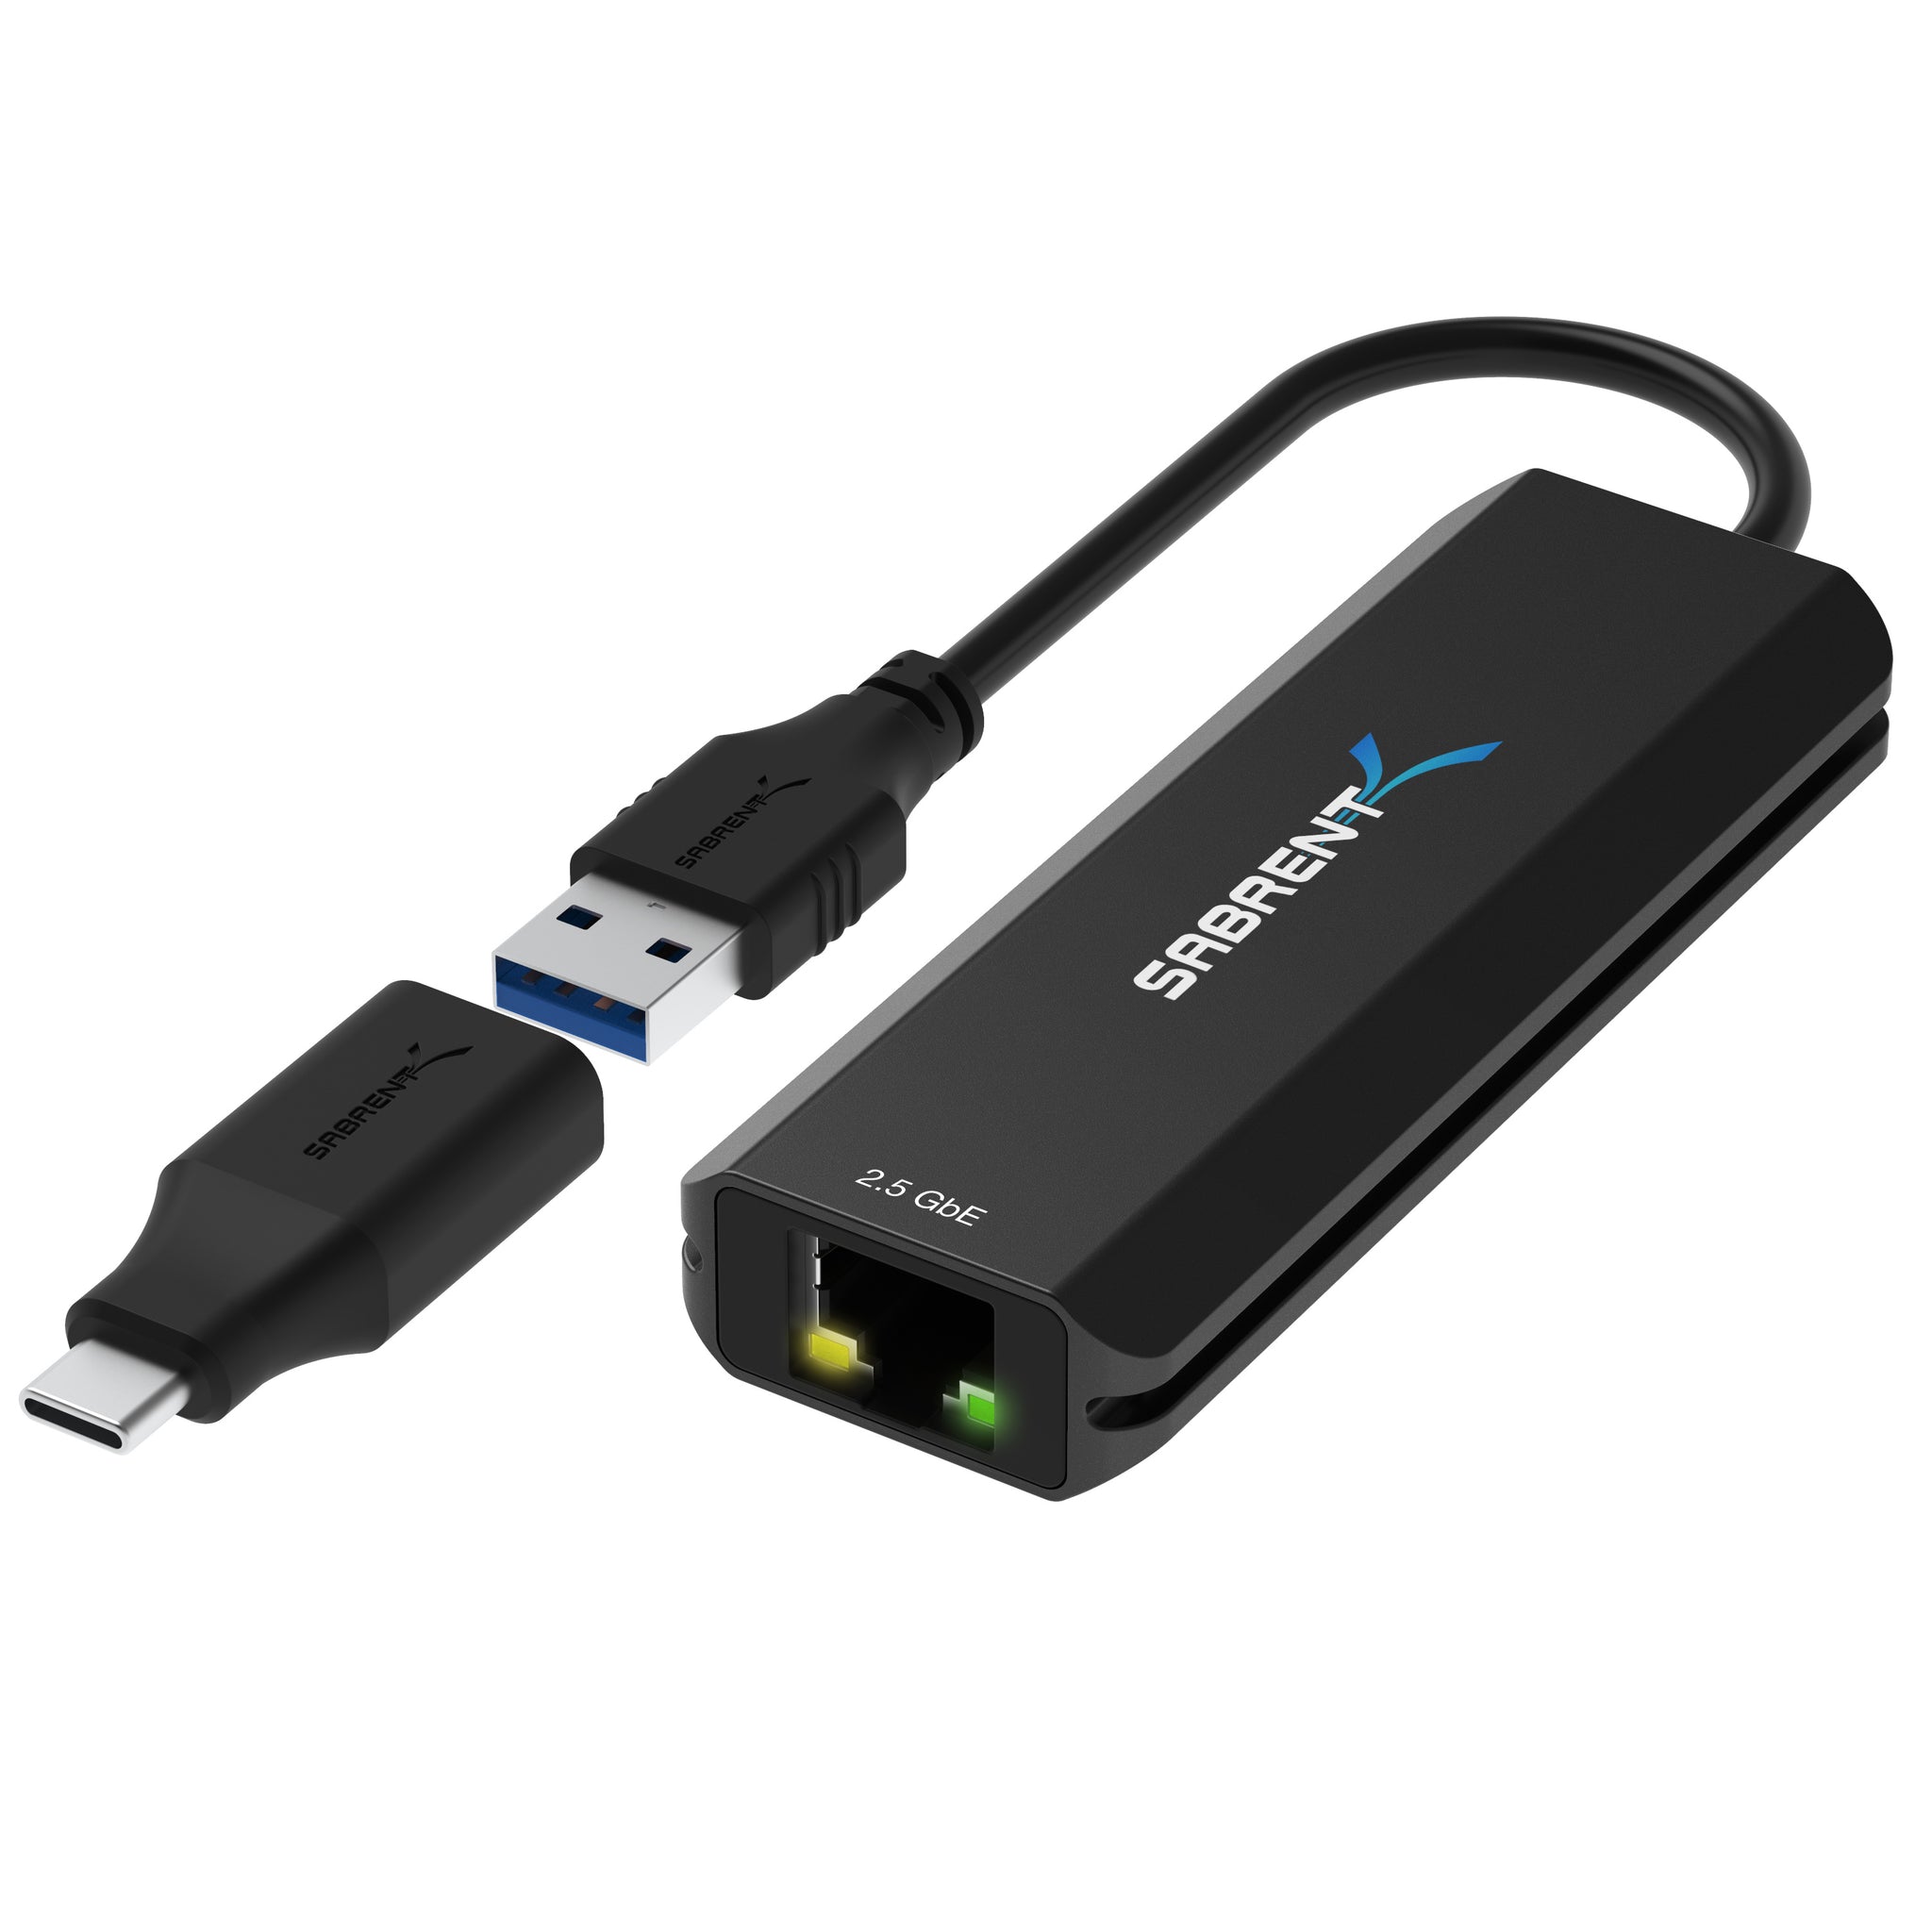 2 in 1 M.2 to USB3.0 Adapter SSD Ethernet Port TYPE-A Cable